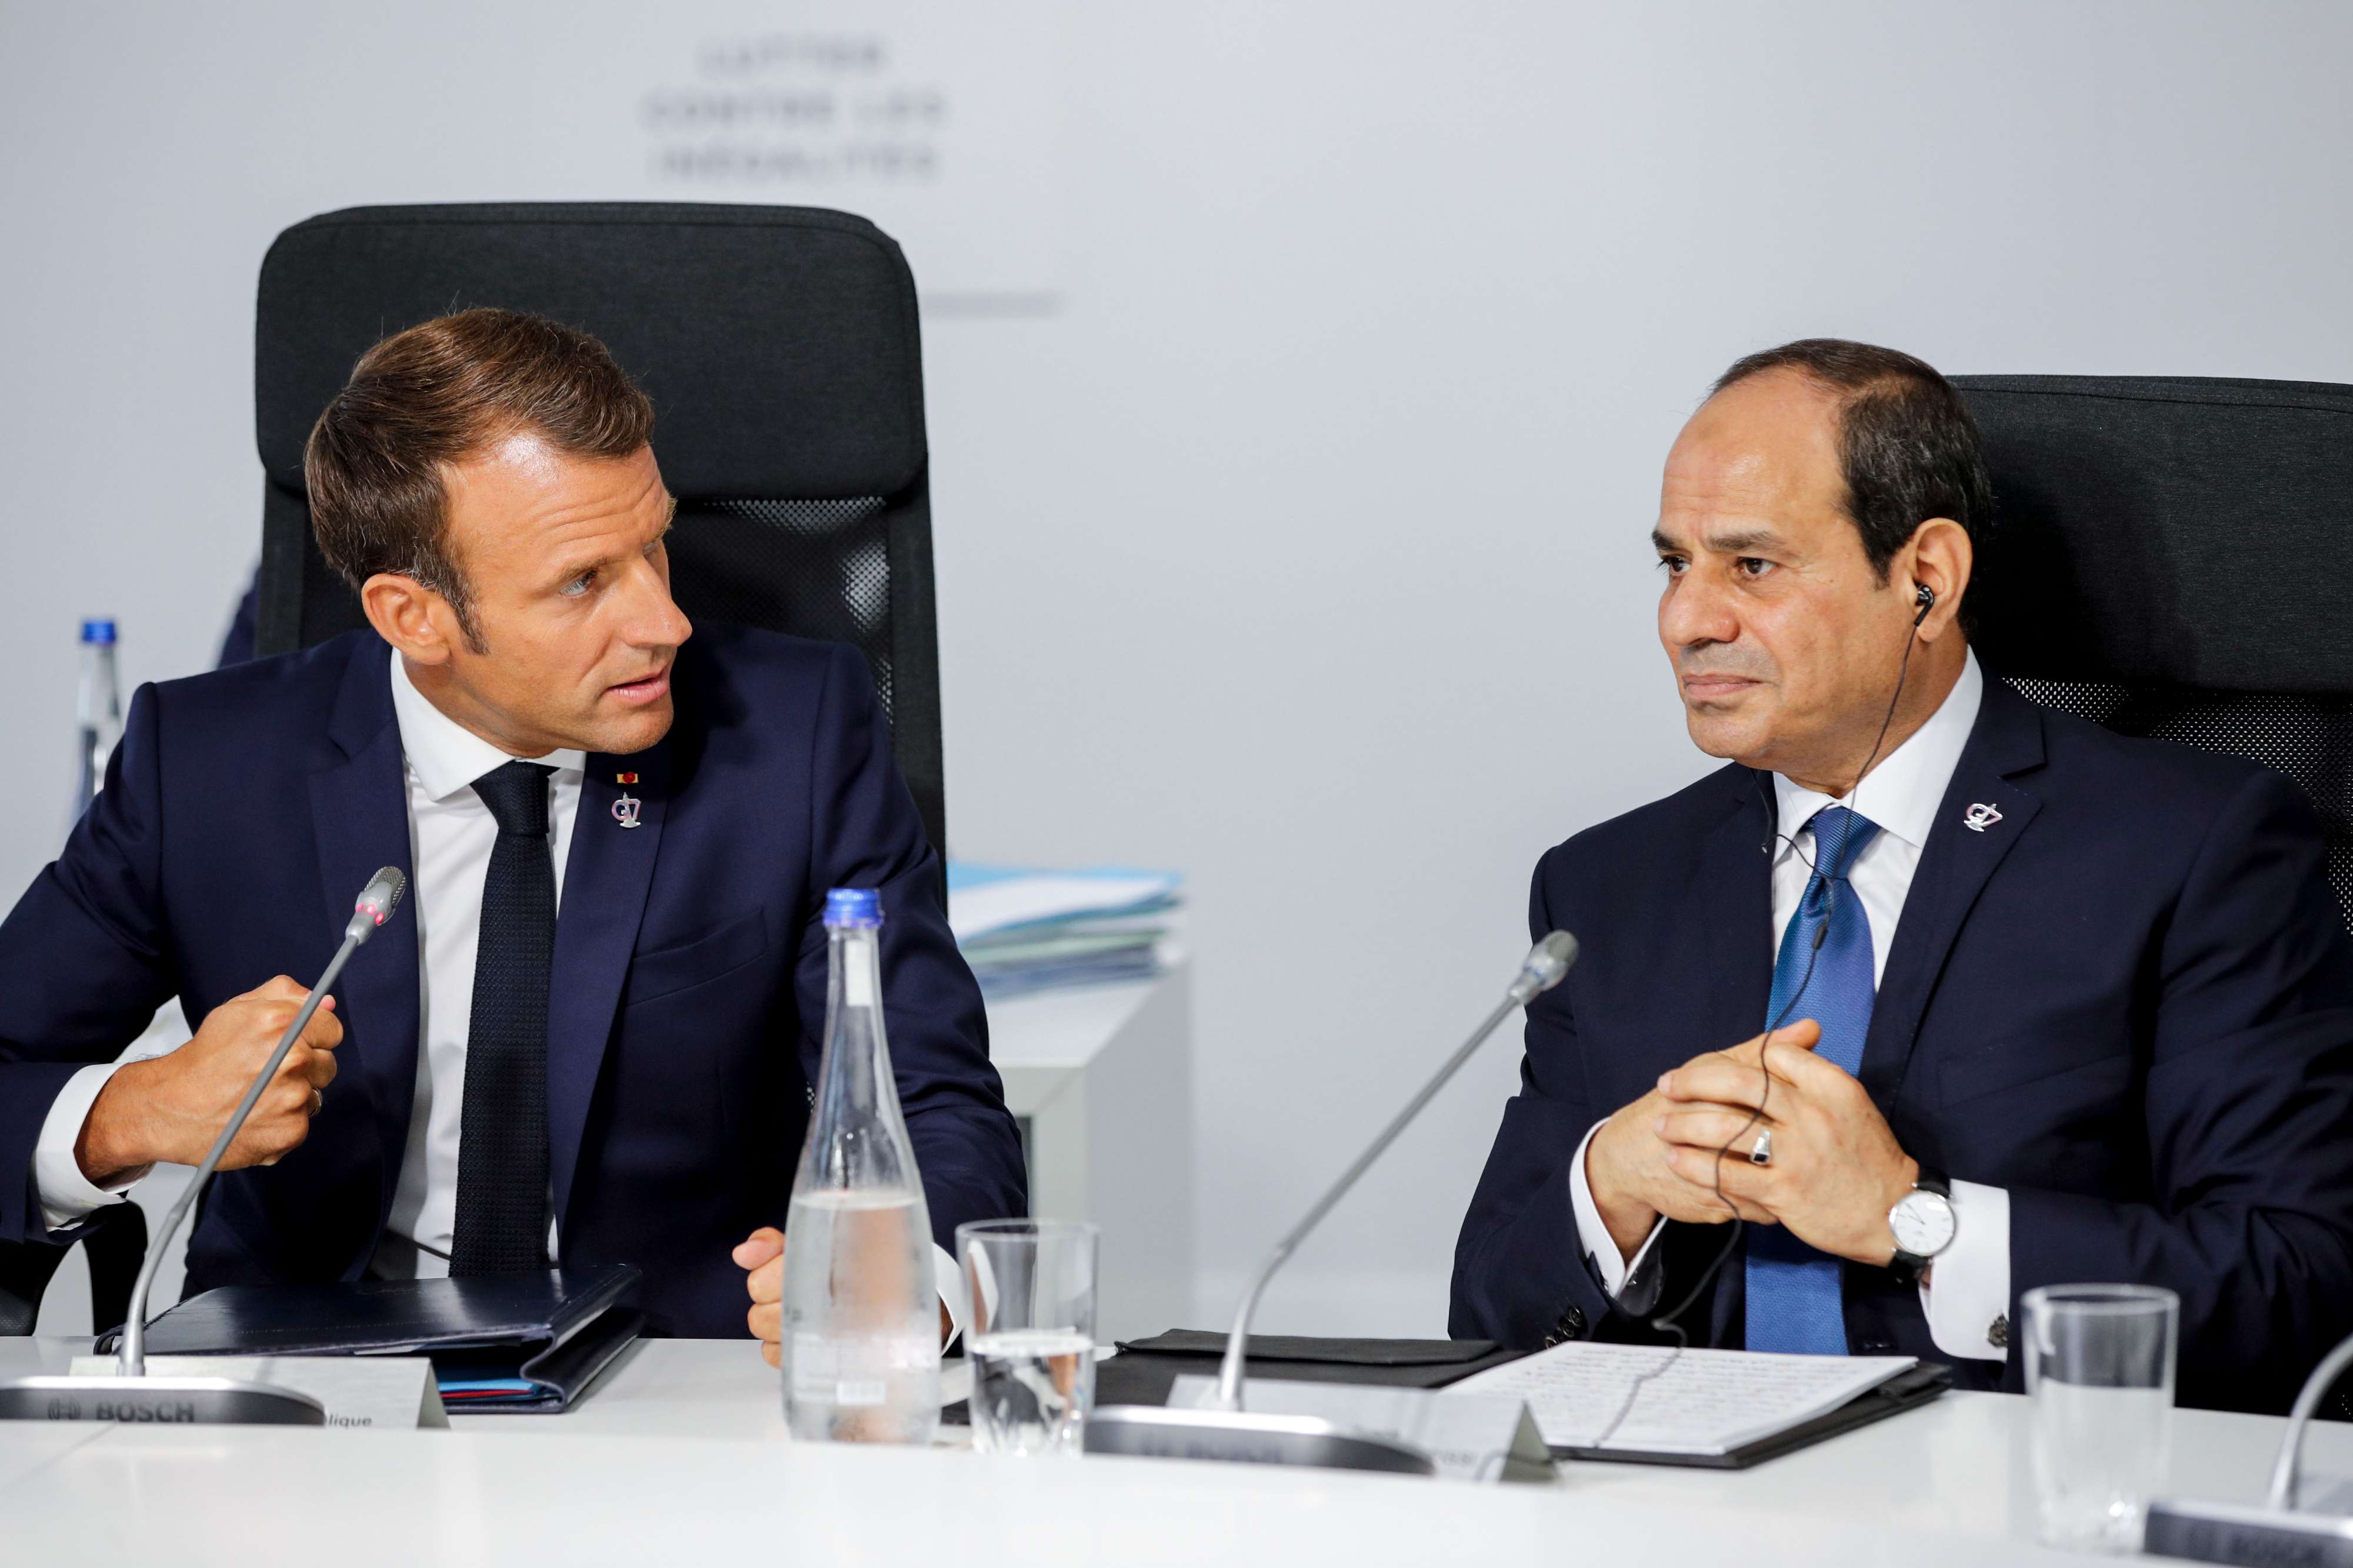 Macron, Sisi urged the ‘greatest restraint’ by Libyan and international authorities to avoid worsening the conflict. 